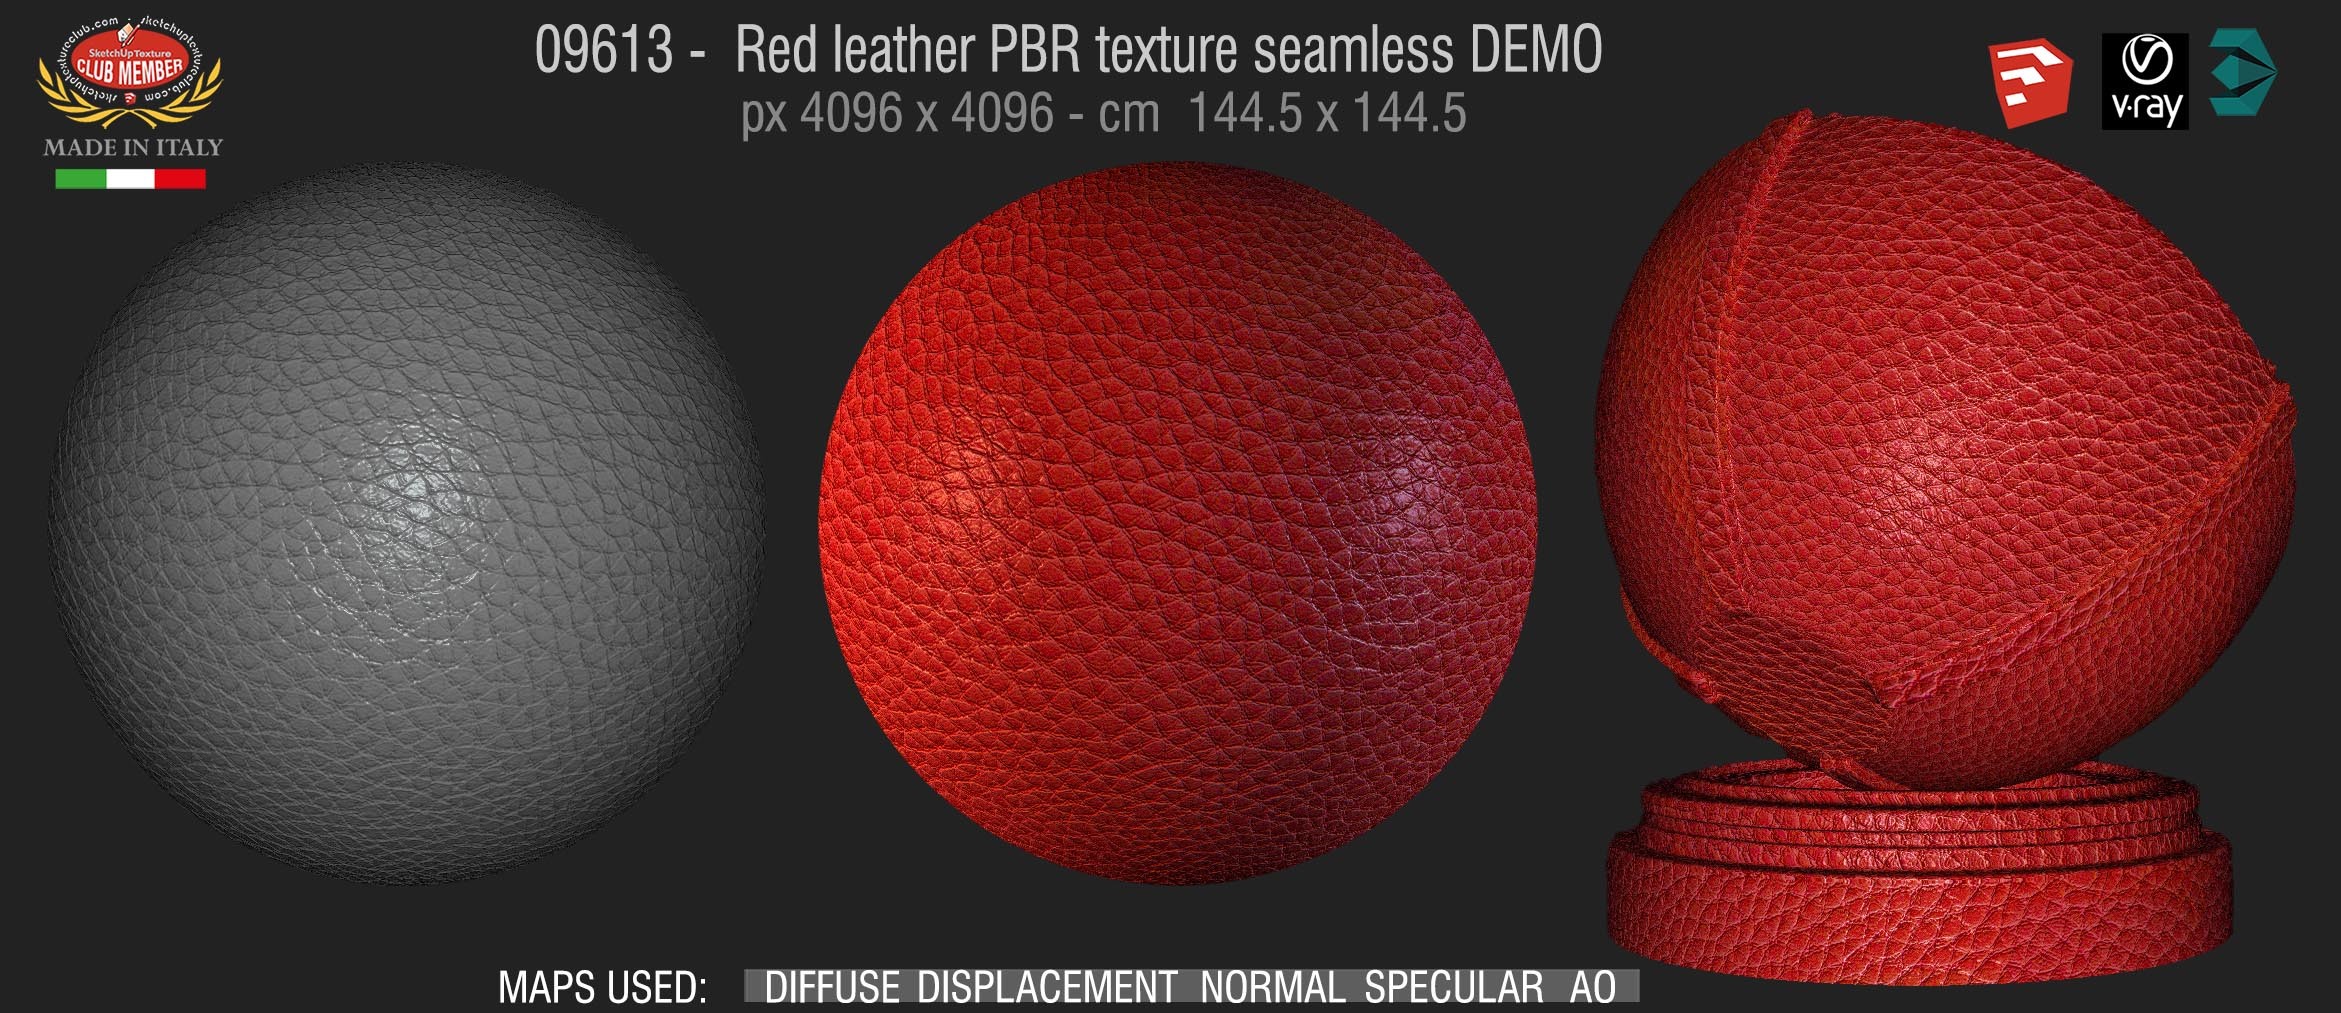 09613 Red leather PBR texture seamless DEMO